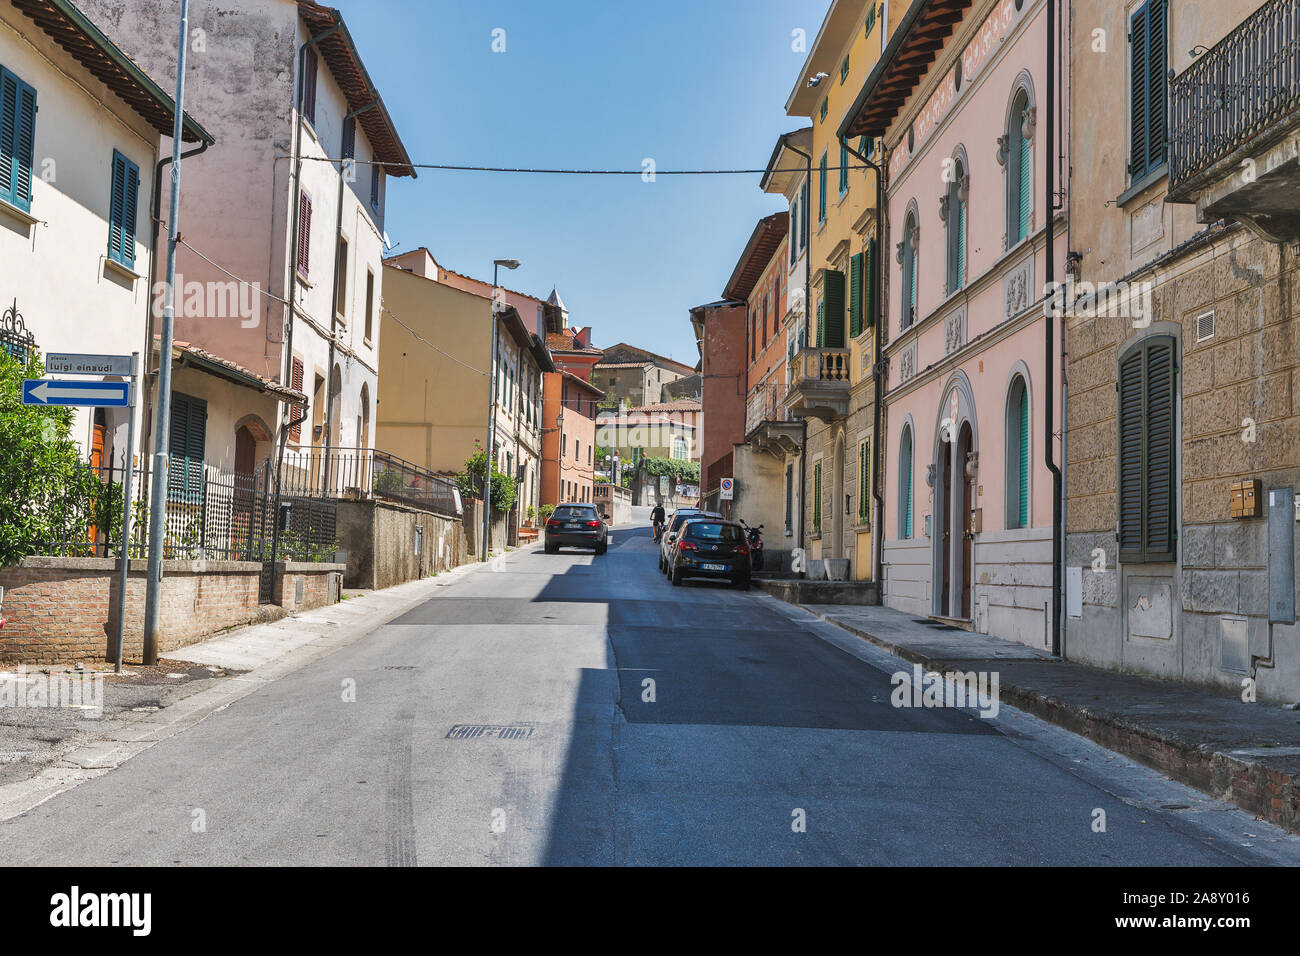 MONTOPOLI, ITALY - JULY 24, 2019: Old residential narrow street. Montopoli in Val d'Arno is a municipality in the Province of Pisa in the Italian regi Stock Photo